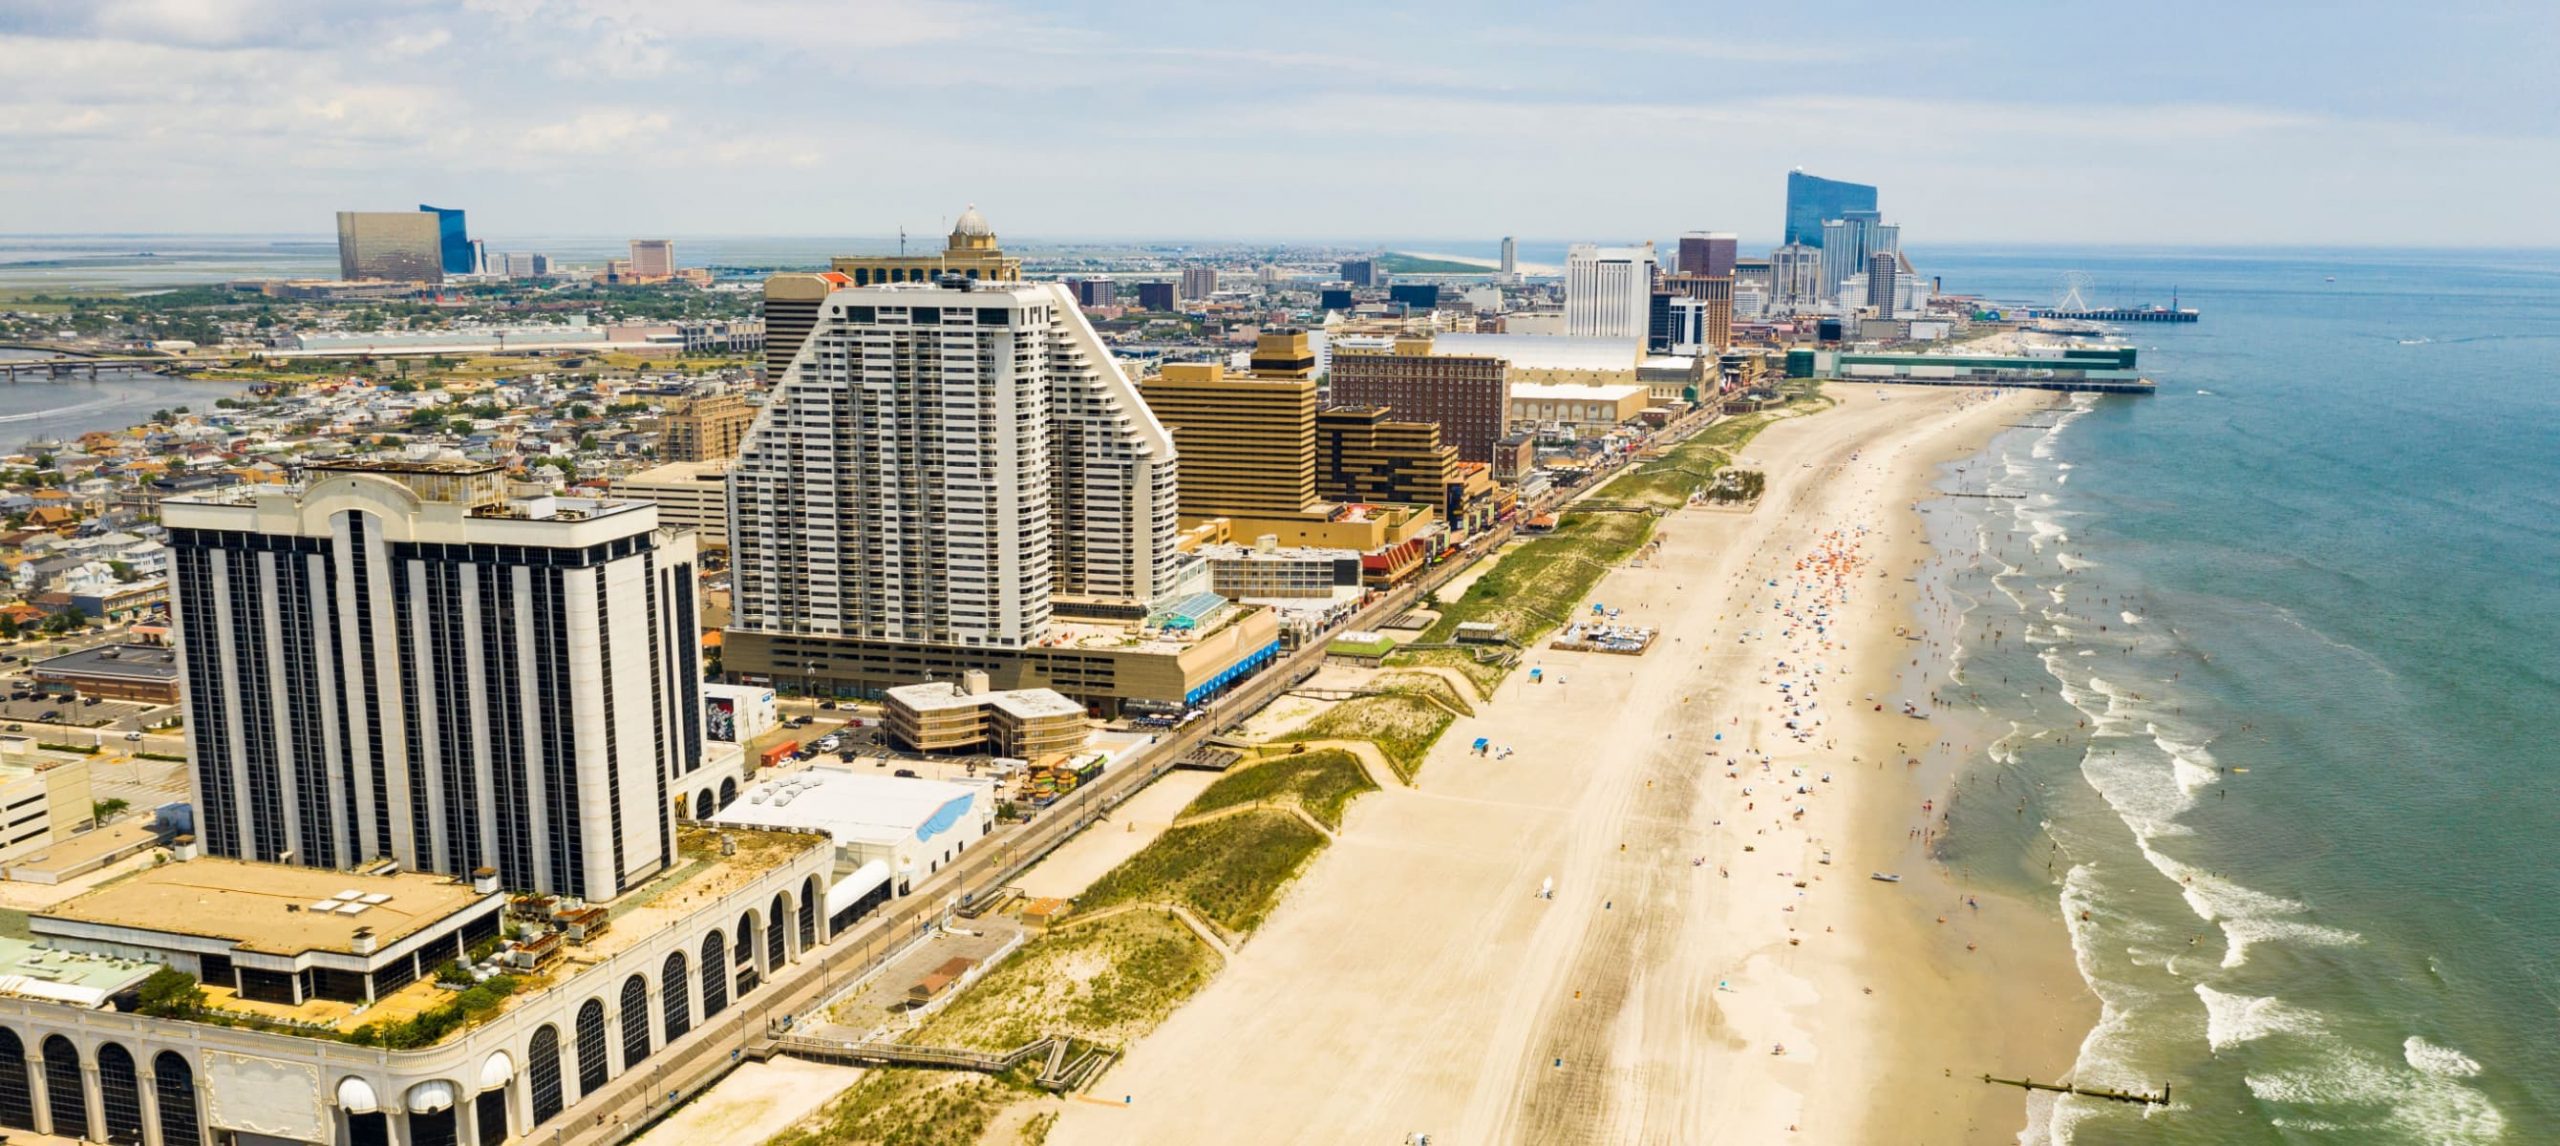 Top Things To Do In Atlantic City, New Jersey